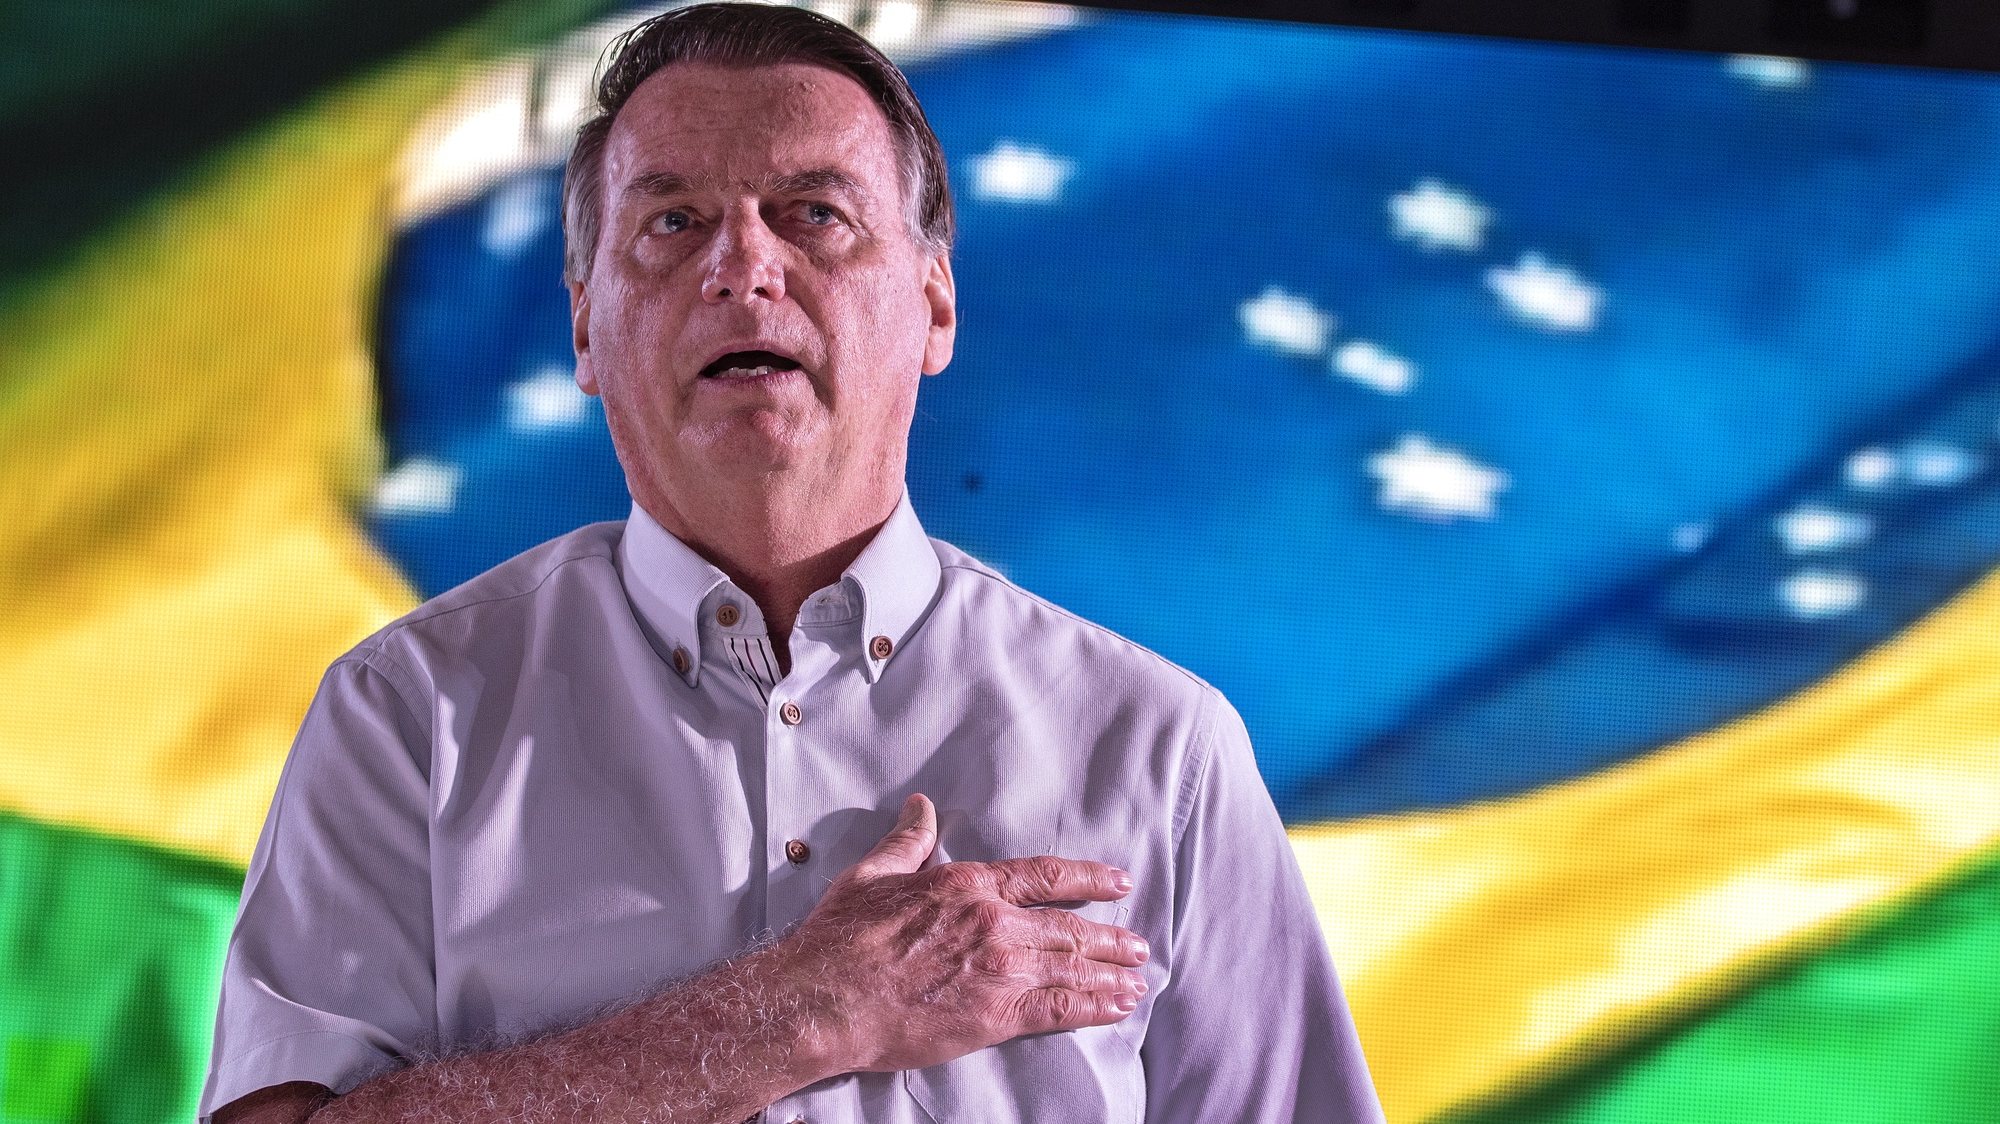 epa10441953 Former Brazilian President Jair Bolsonaro attends an event with members of the Brazilian community at the Majestic Life Church in Orlando, Florida, USA, 31 January 2023. Bolsonaro has applied for a six-month visitor visa to remain in the US, according to his lawyer Felipe Alexandre.  EPA/CRISTOBAL HERRERA-ULASHKEVICH